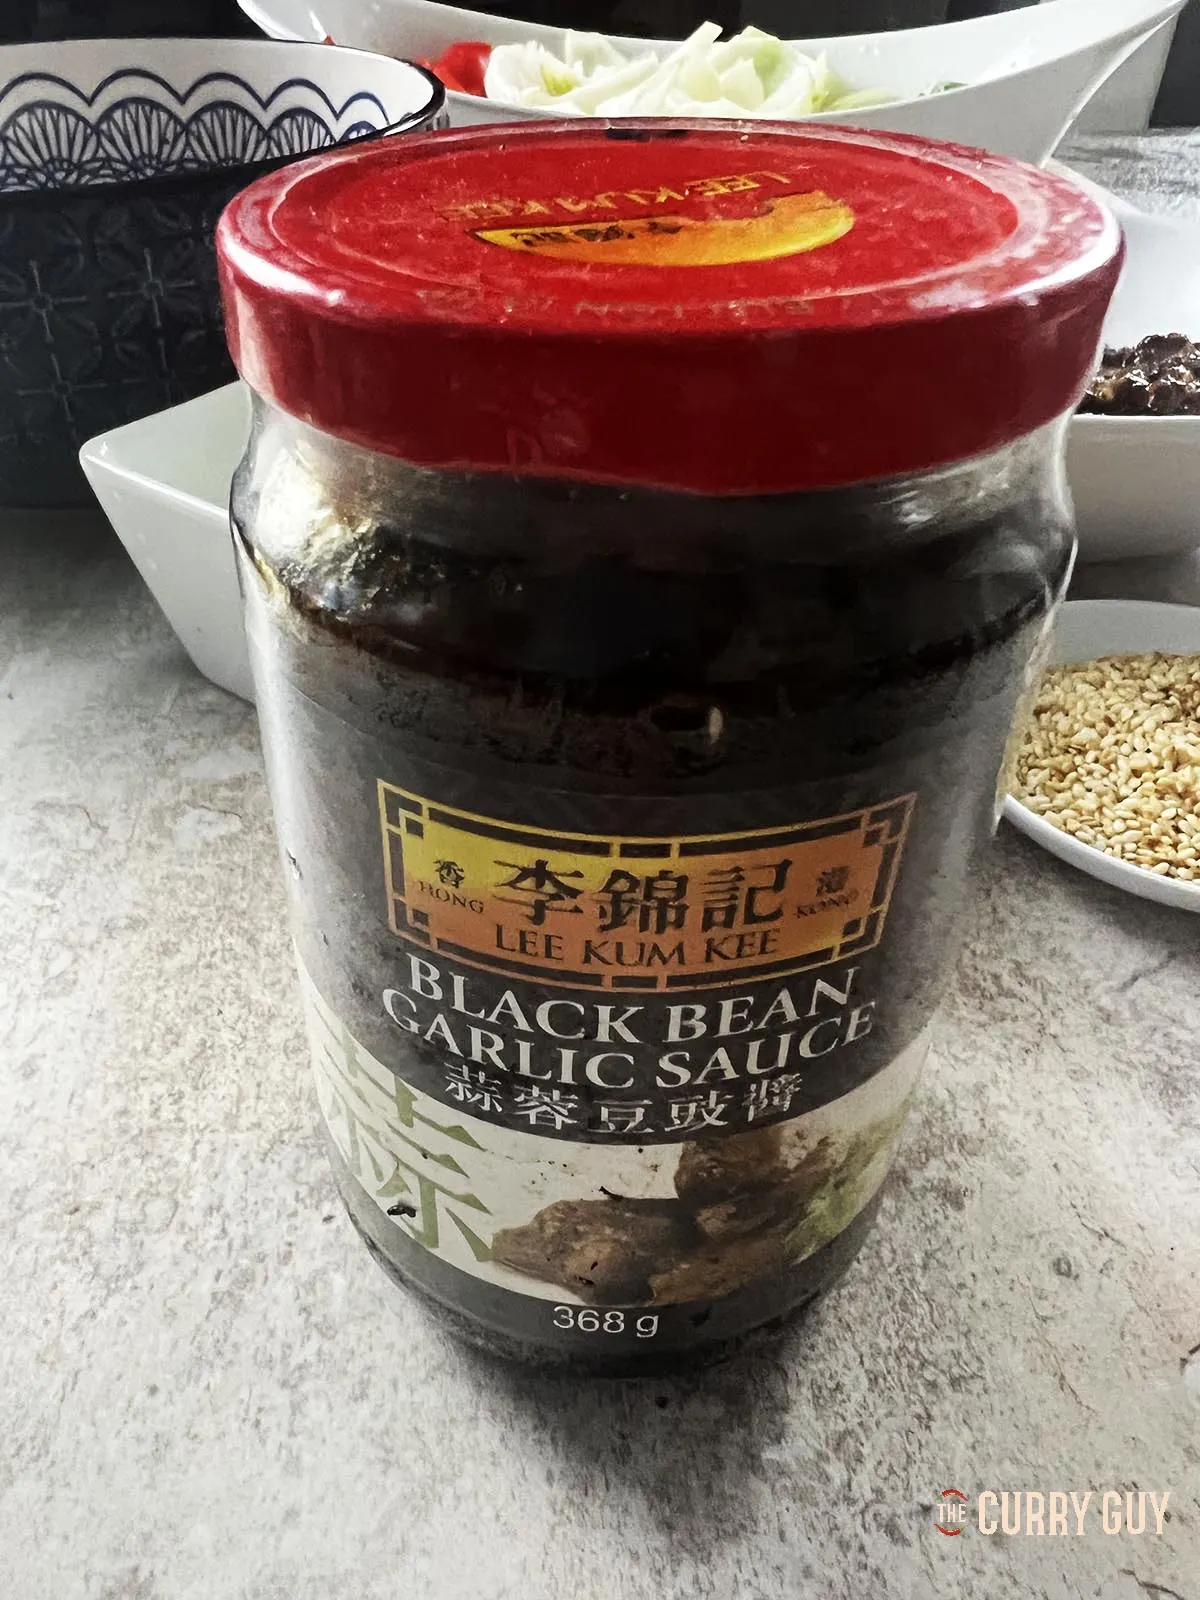 Black bean sauce in a jar. Commercial brand.